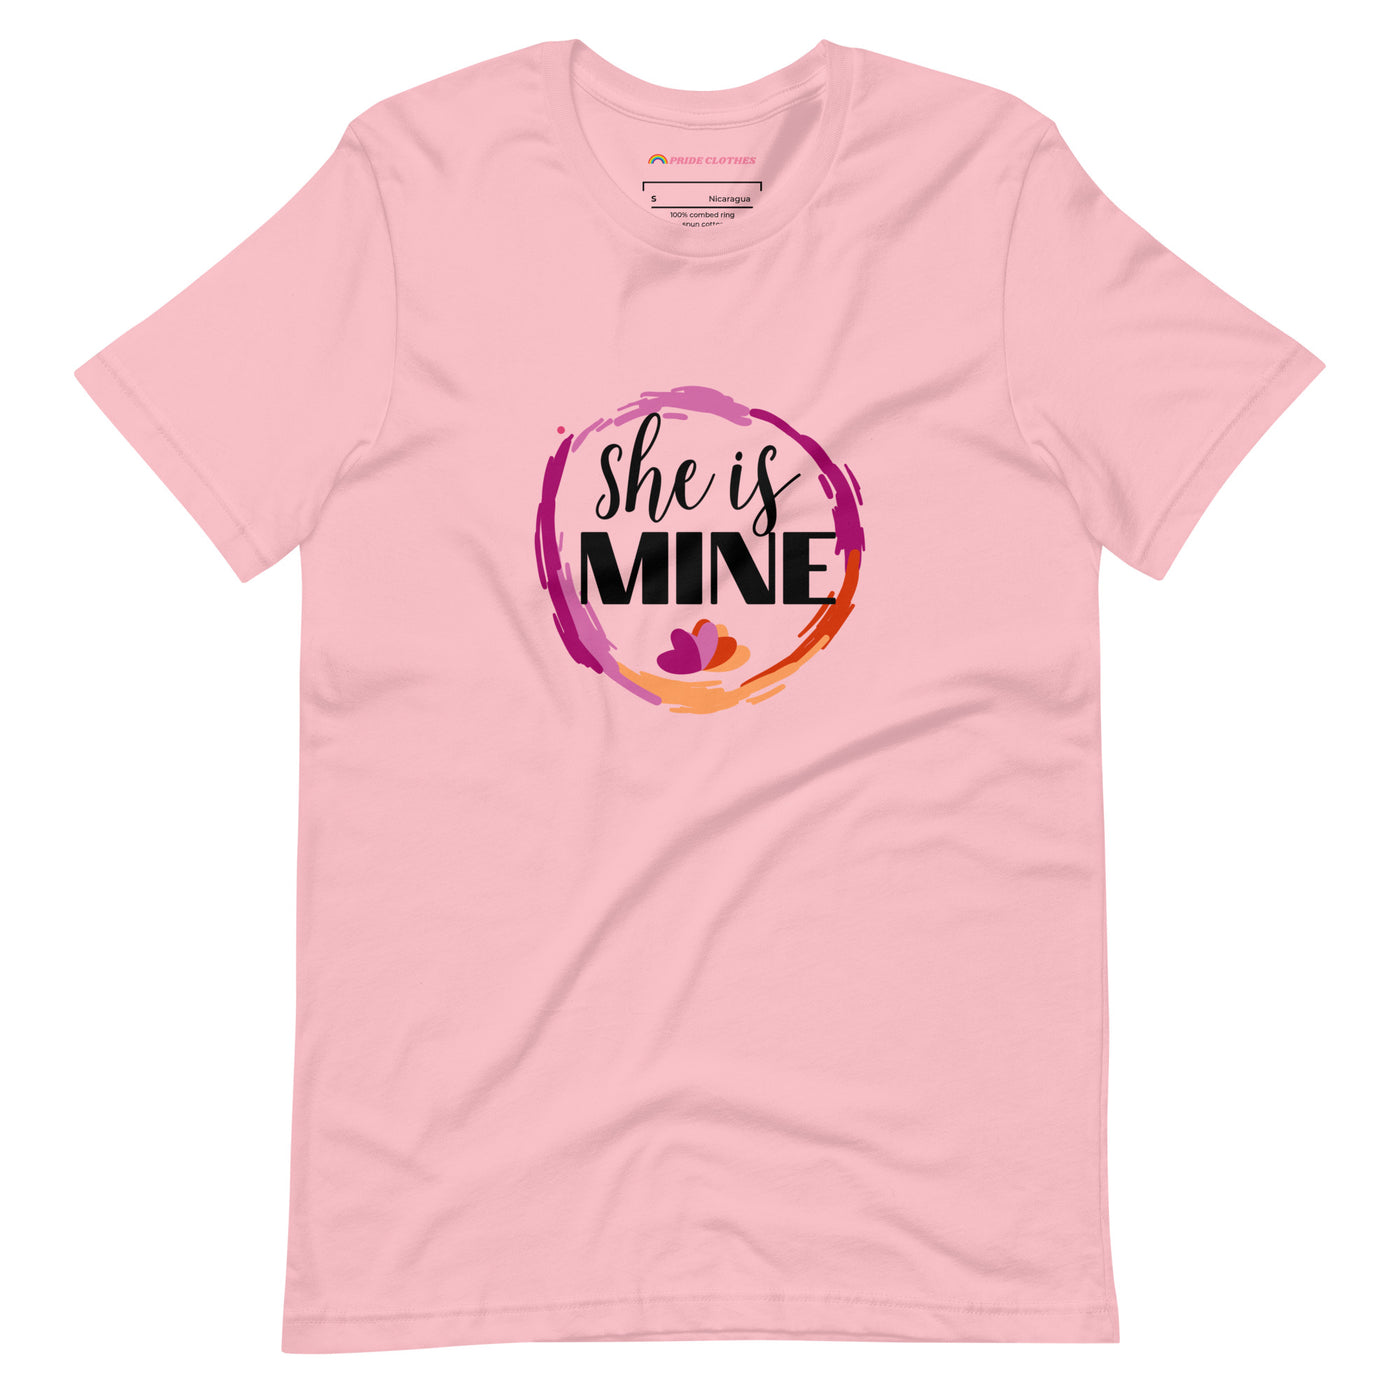 Pride Clothes - She Is Mine Lesbian Pride T-Shirt - Pink